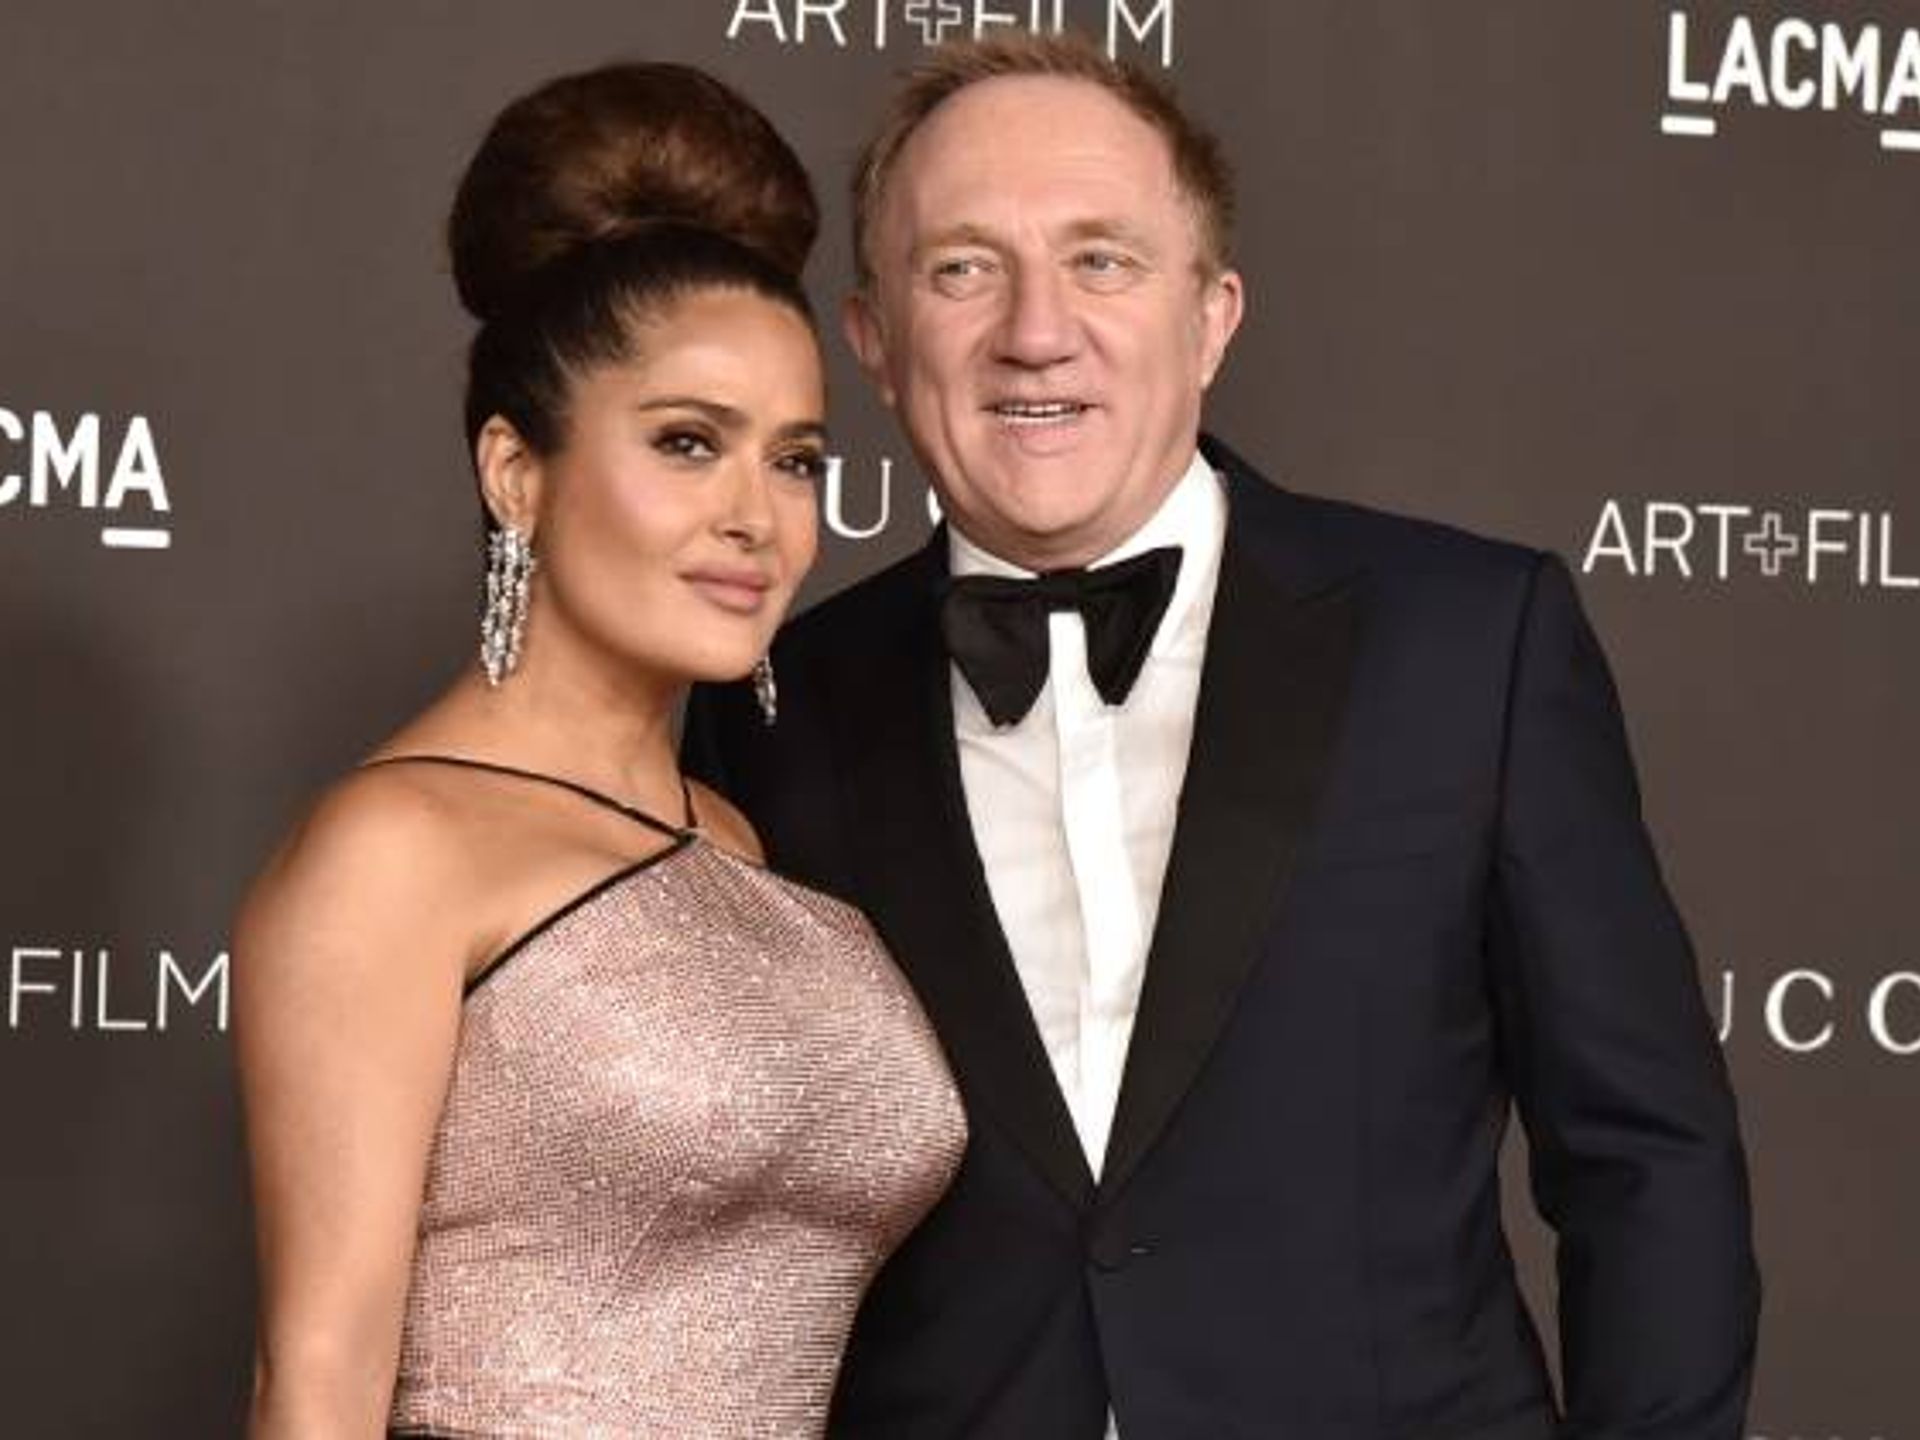 Salma Hayek's secret home with billionaire husband will make your head spin  - see unbelievably rare photos